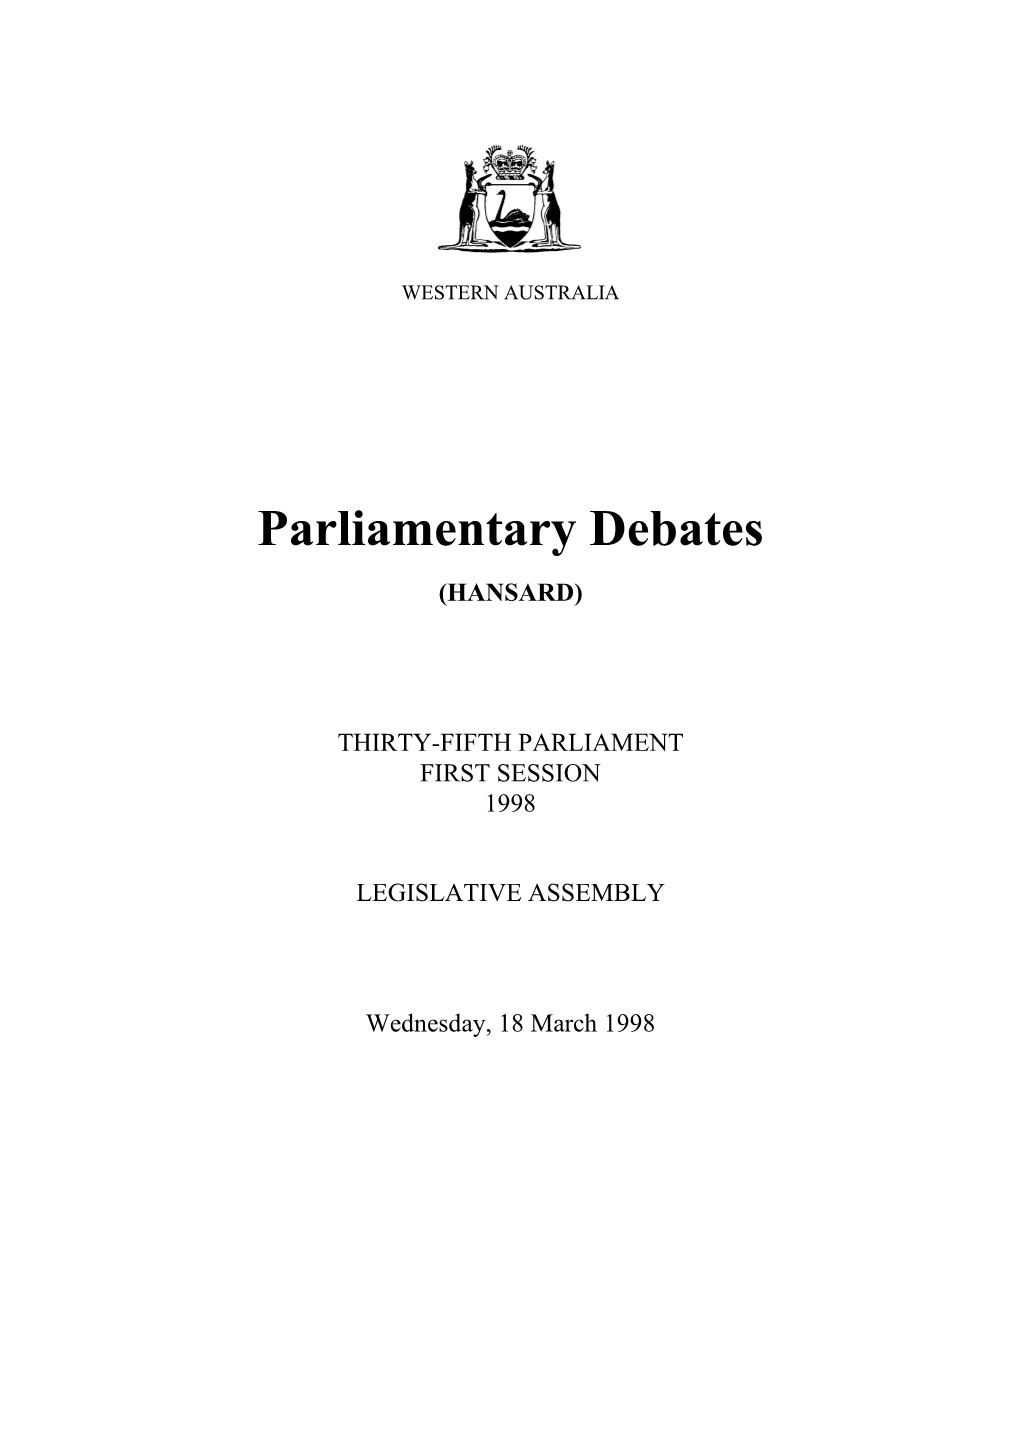 Assembly Wednesday, 18 March 1998